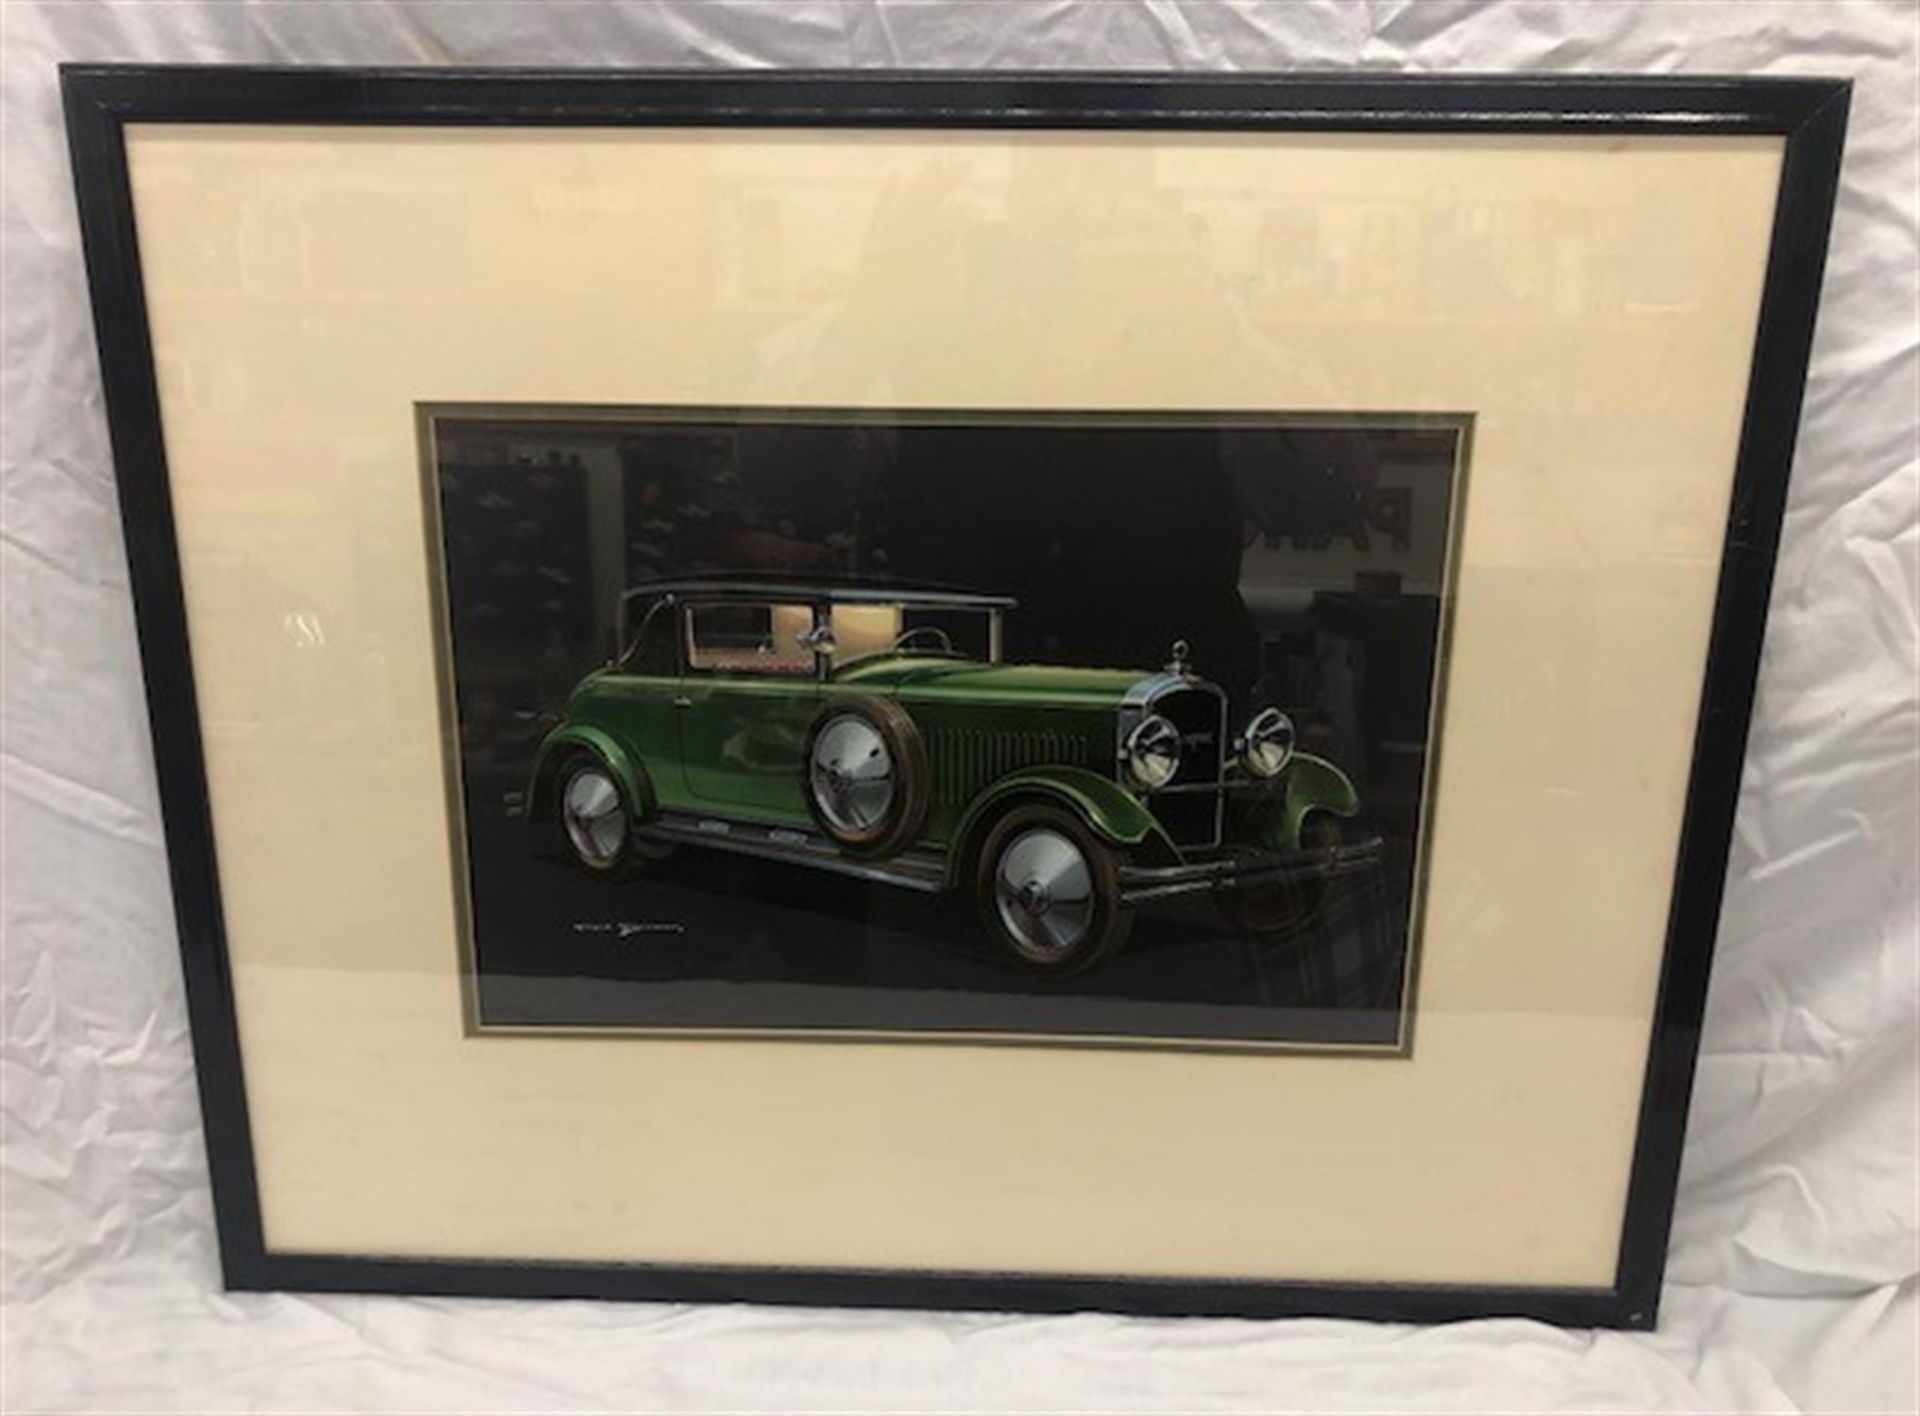 A Fine Offset-Lithographic Colour Print of a 1928 Peugeot 18CV - Image 3 of 3